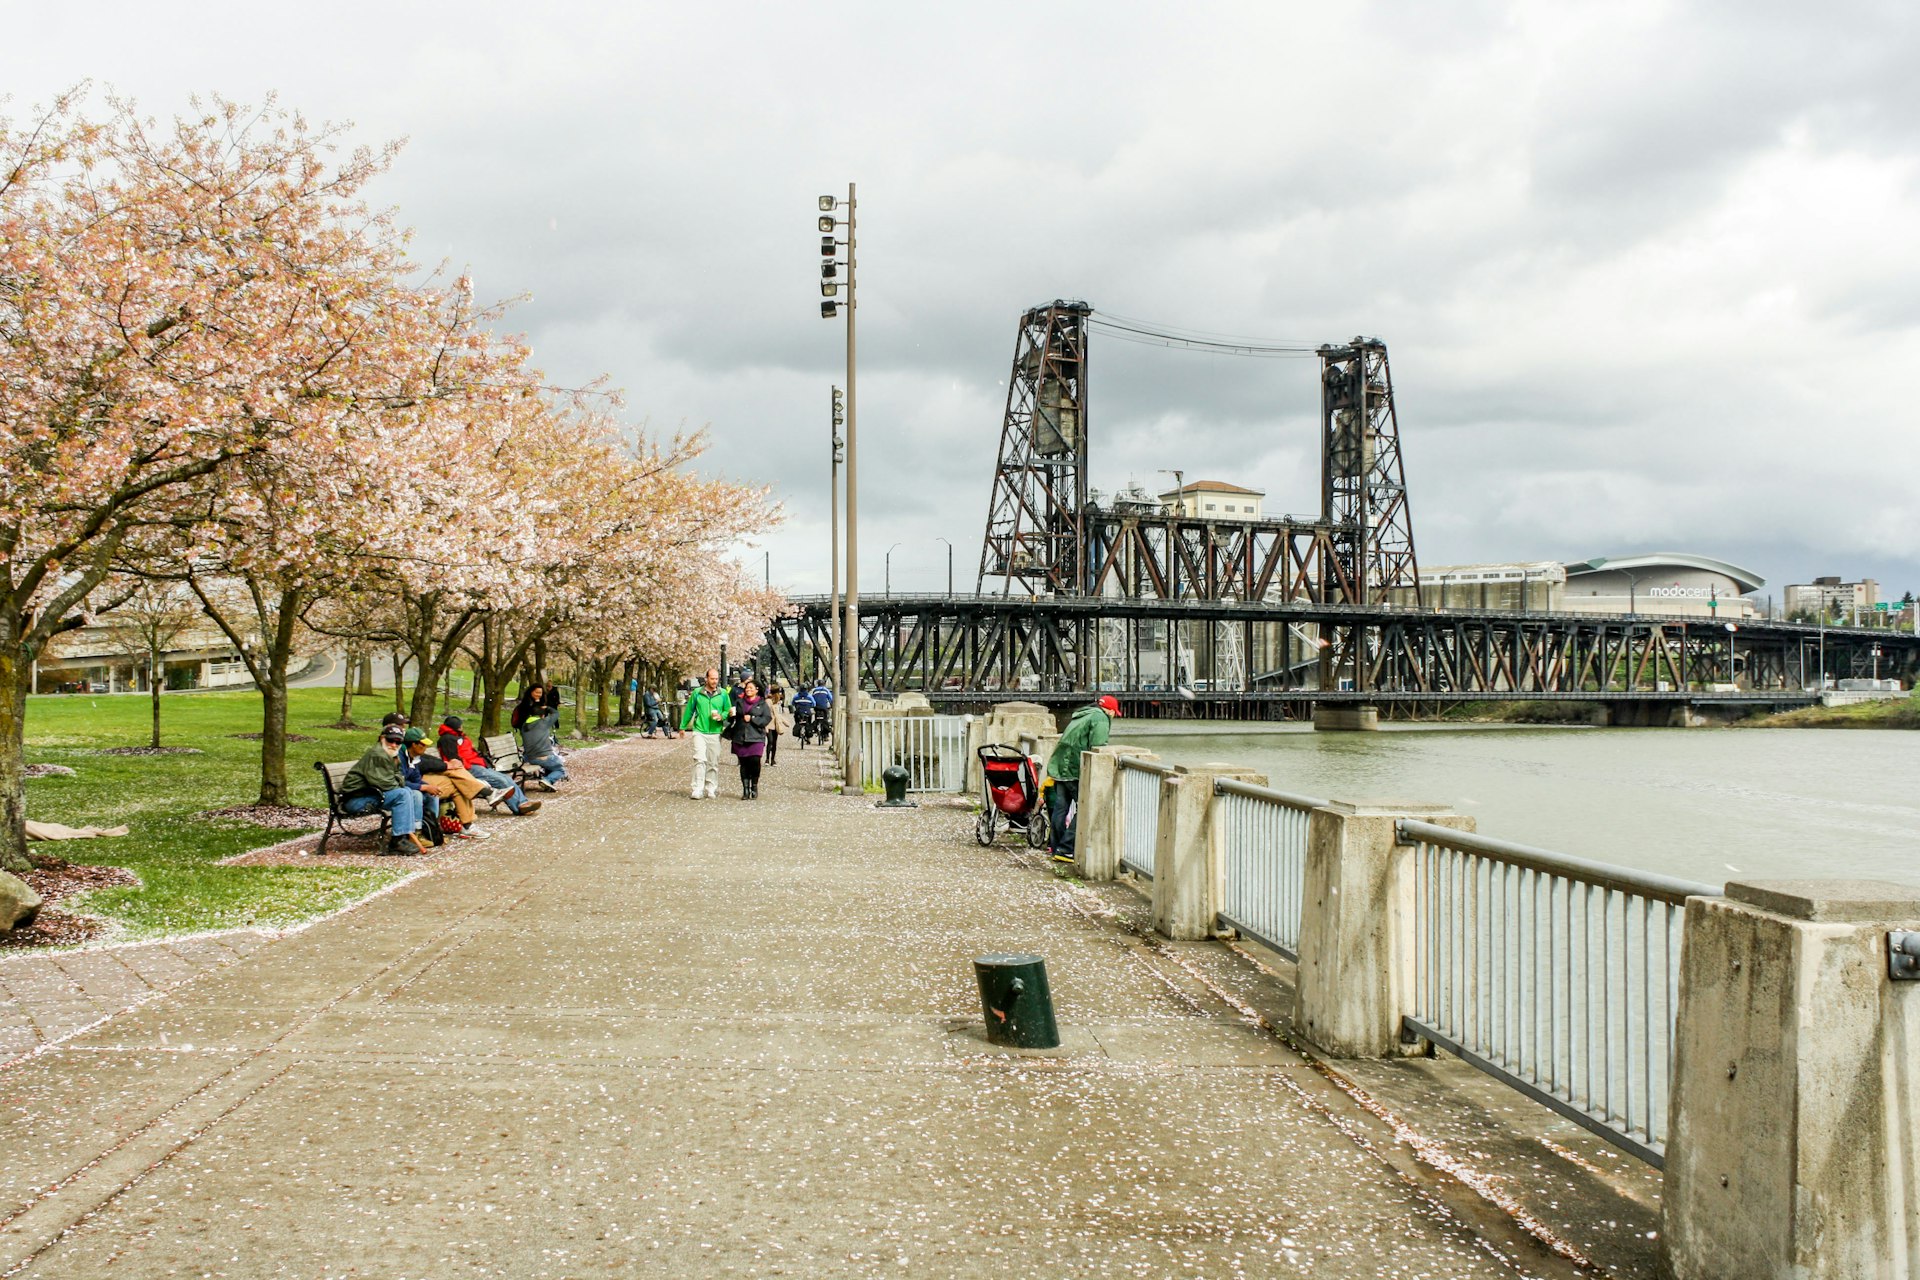 Tom McCall Waterfront Park was one of the first examples of freeway removal, an urban policy plan to improve quality of life for residents. Image by Alexander Howard / Lonely Planet